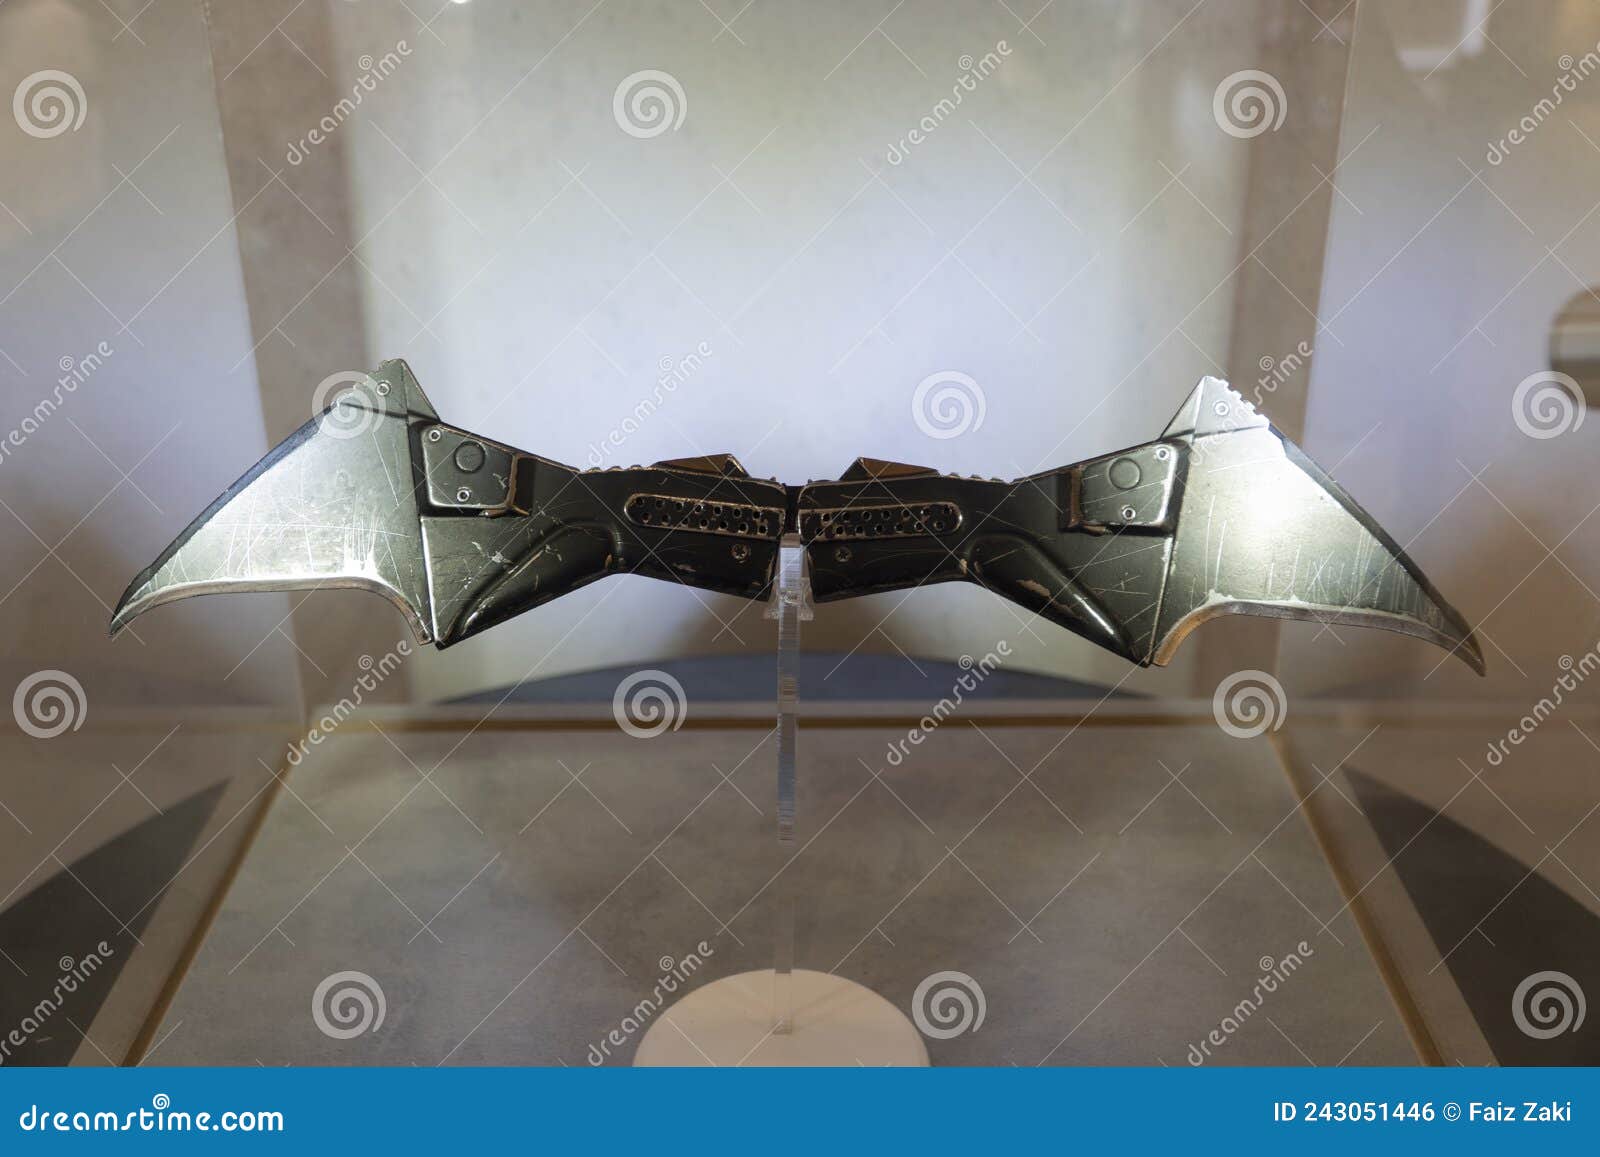 Boomerang and Chest Plate from the Batman. this is a Road Show Promotion  for the Latest DC Movie Editorial Photo - Image of poster, fighting:  243051446